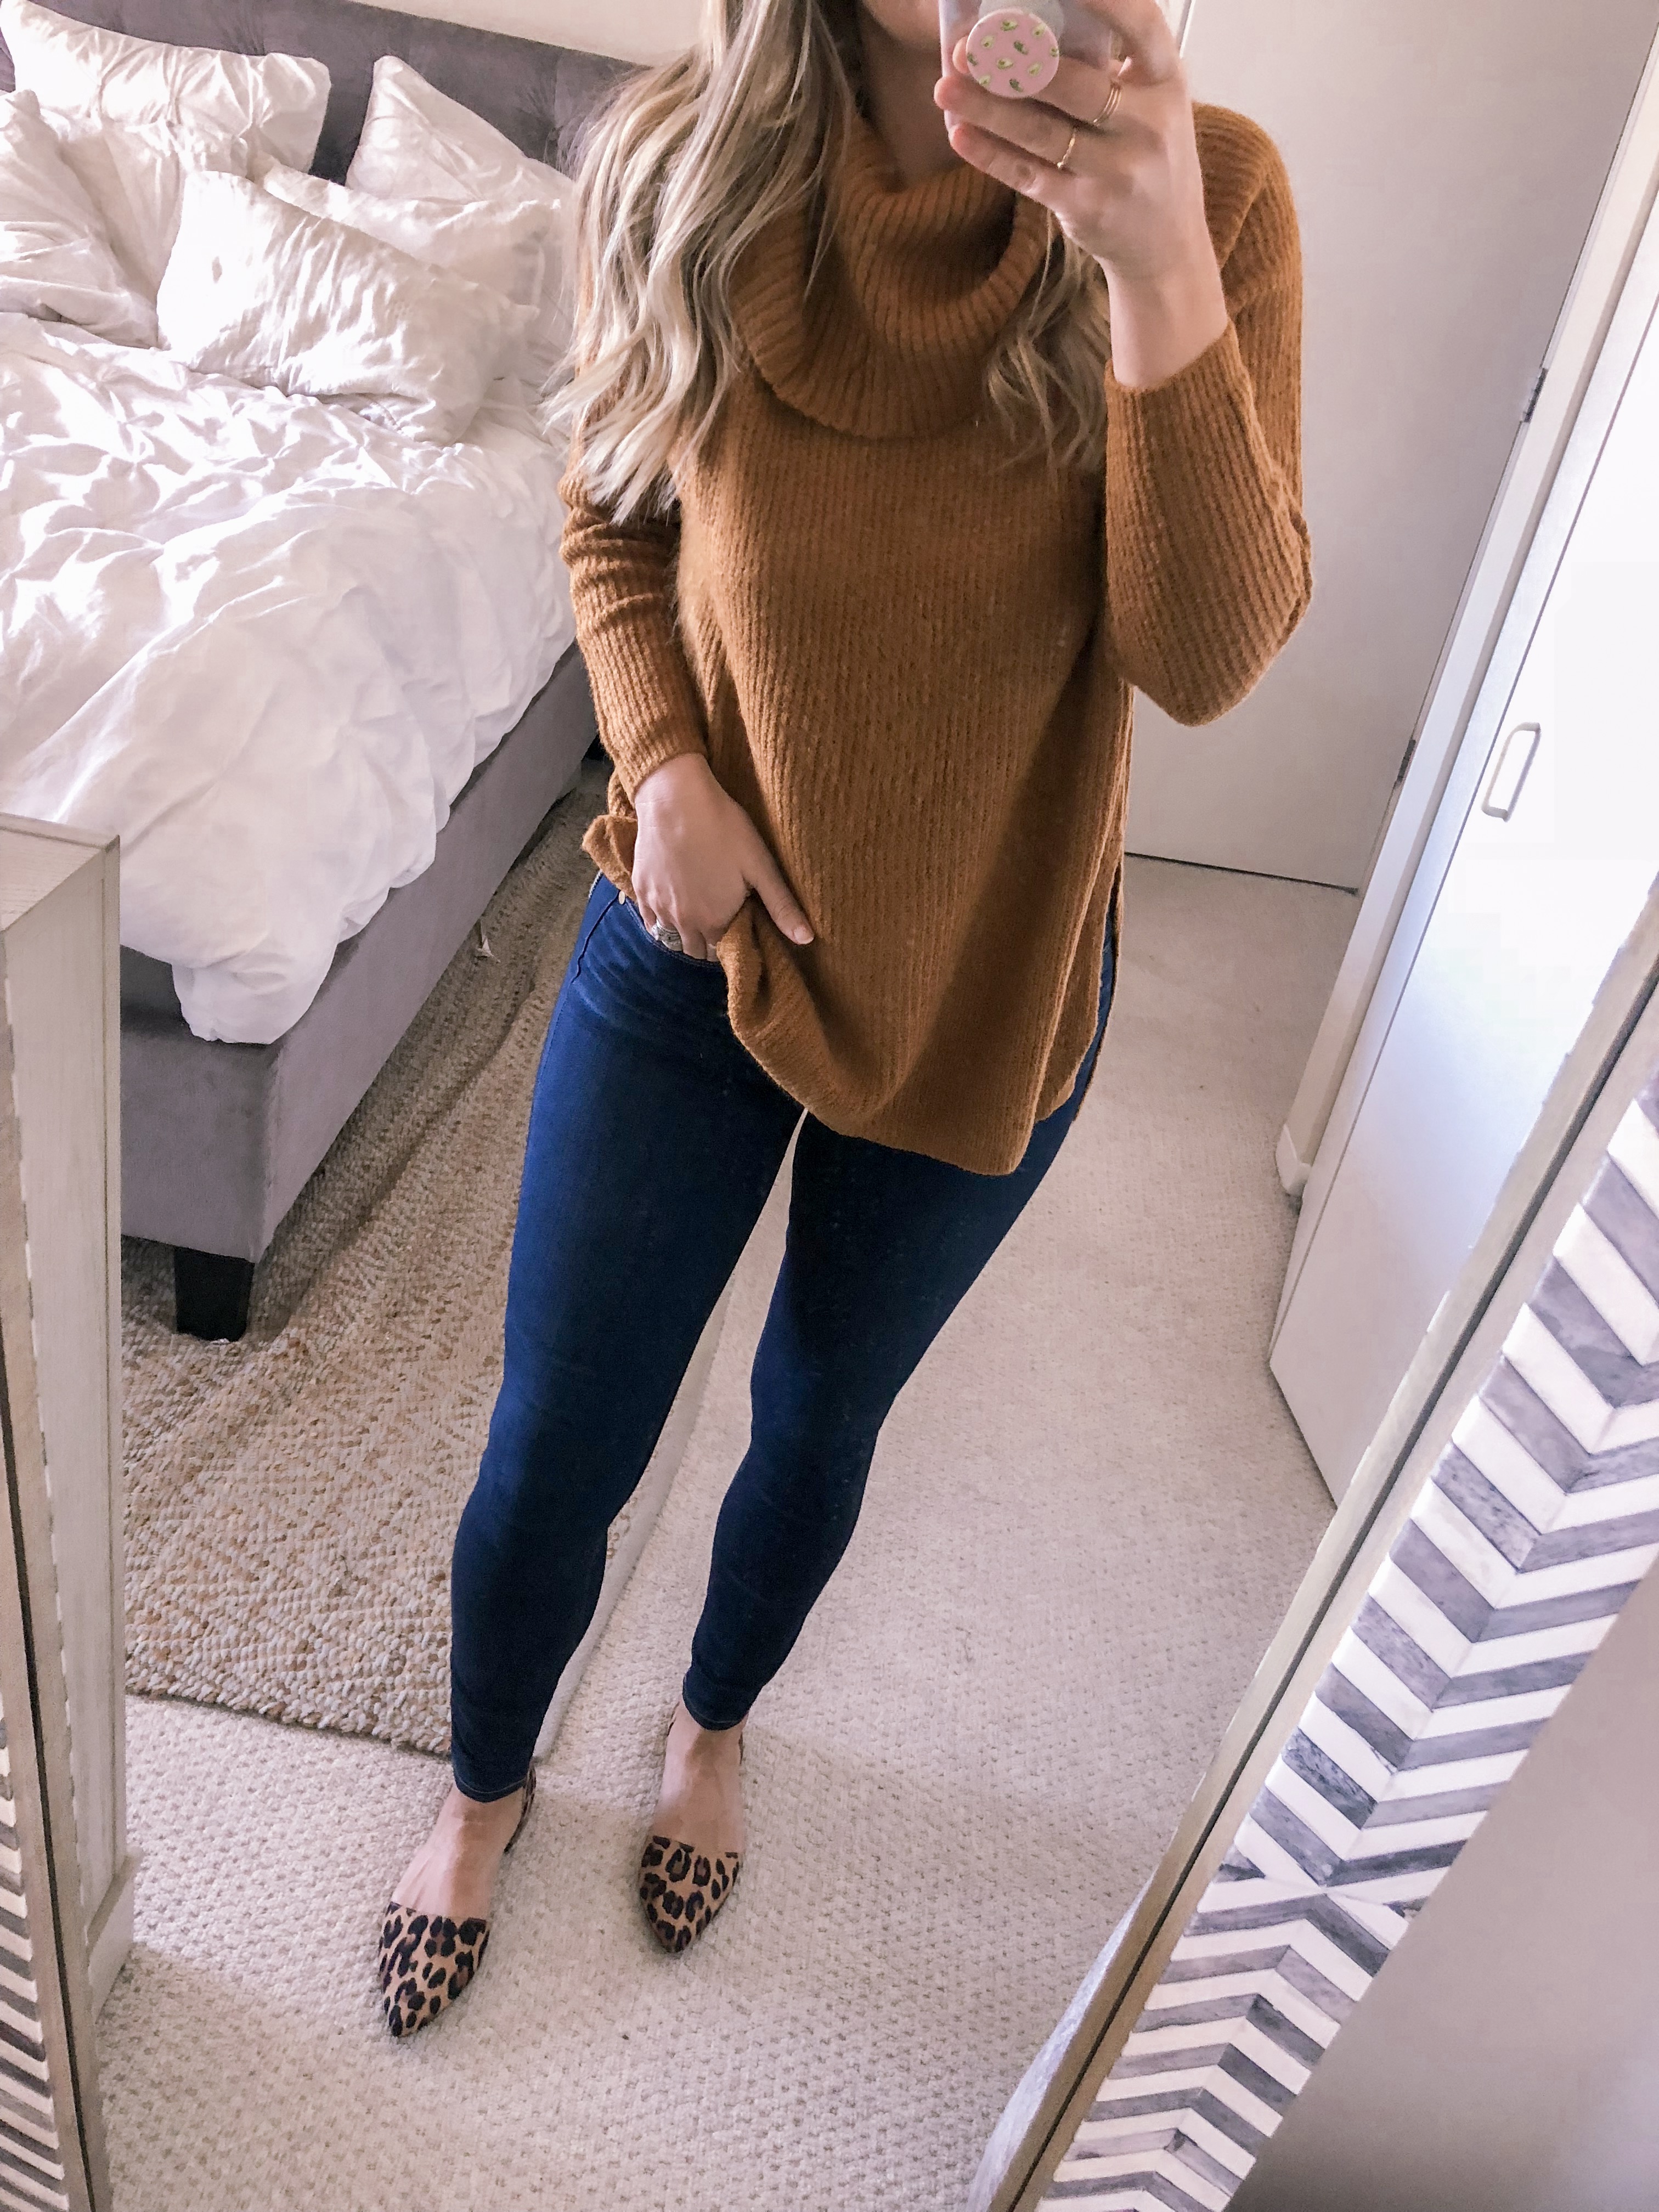 Jenna Colgrove wears an affordable, cowl neck sweater from Nordstrom by Dreams for fall office outfit ides.